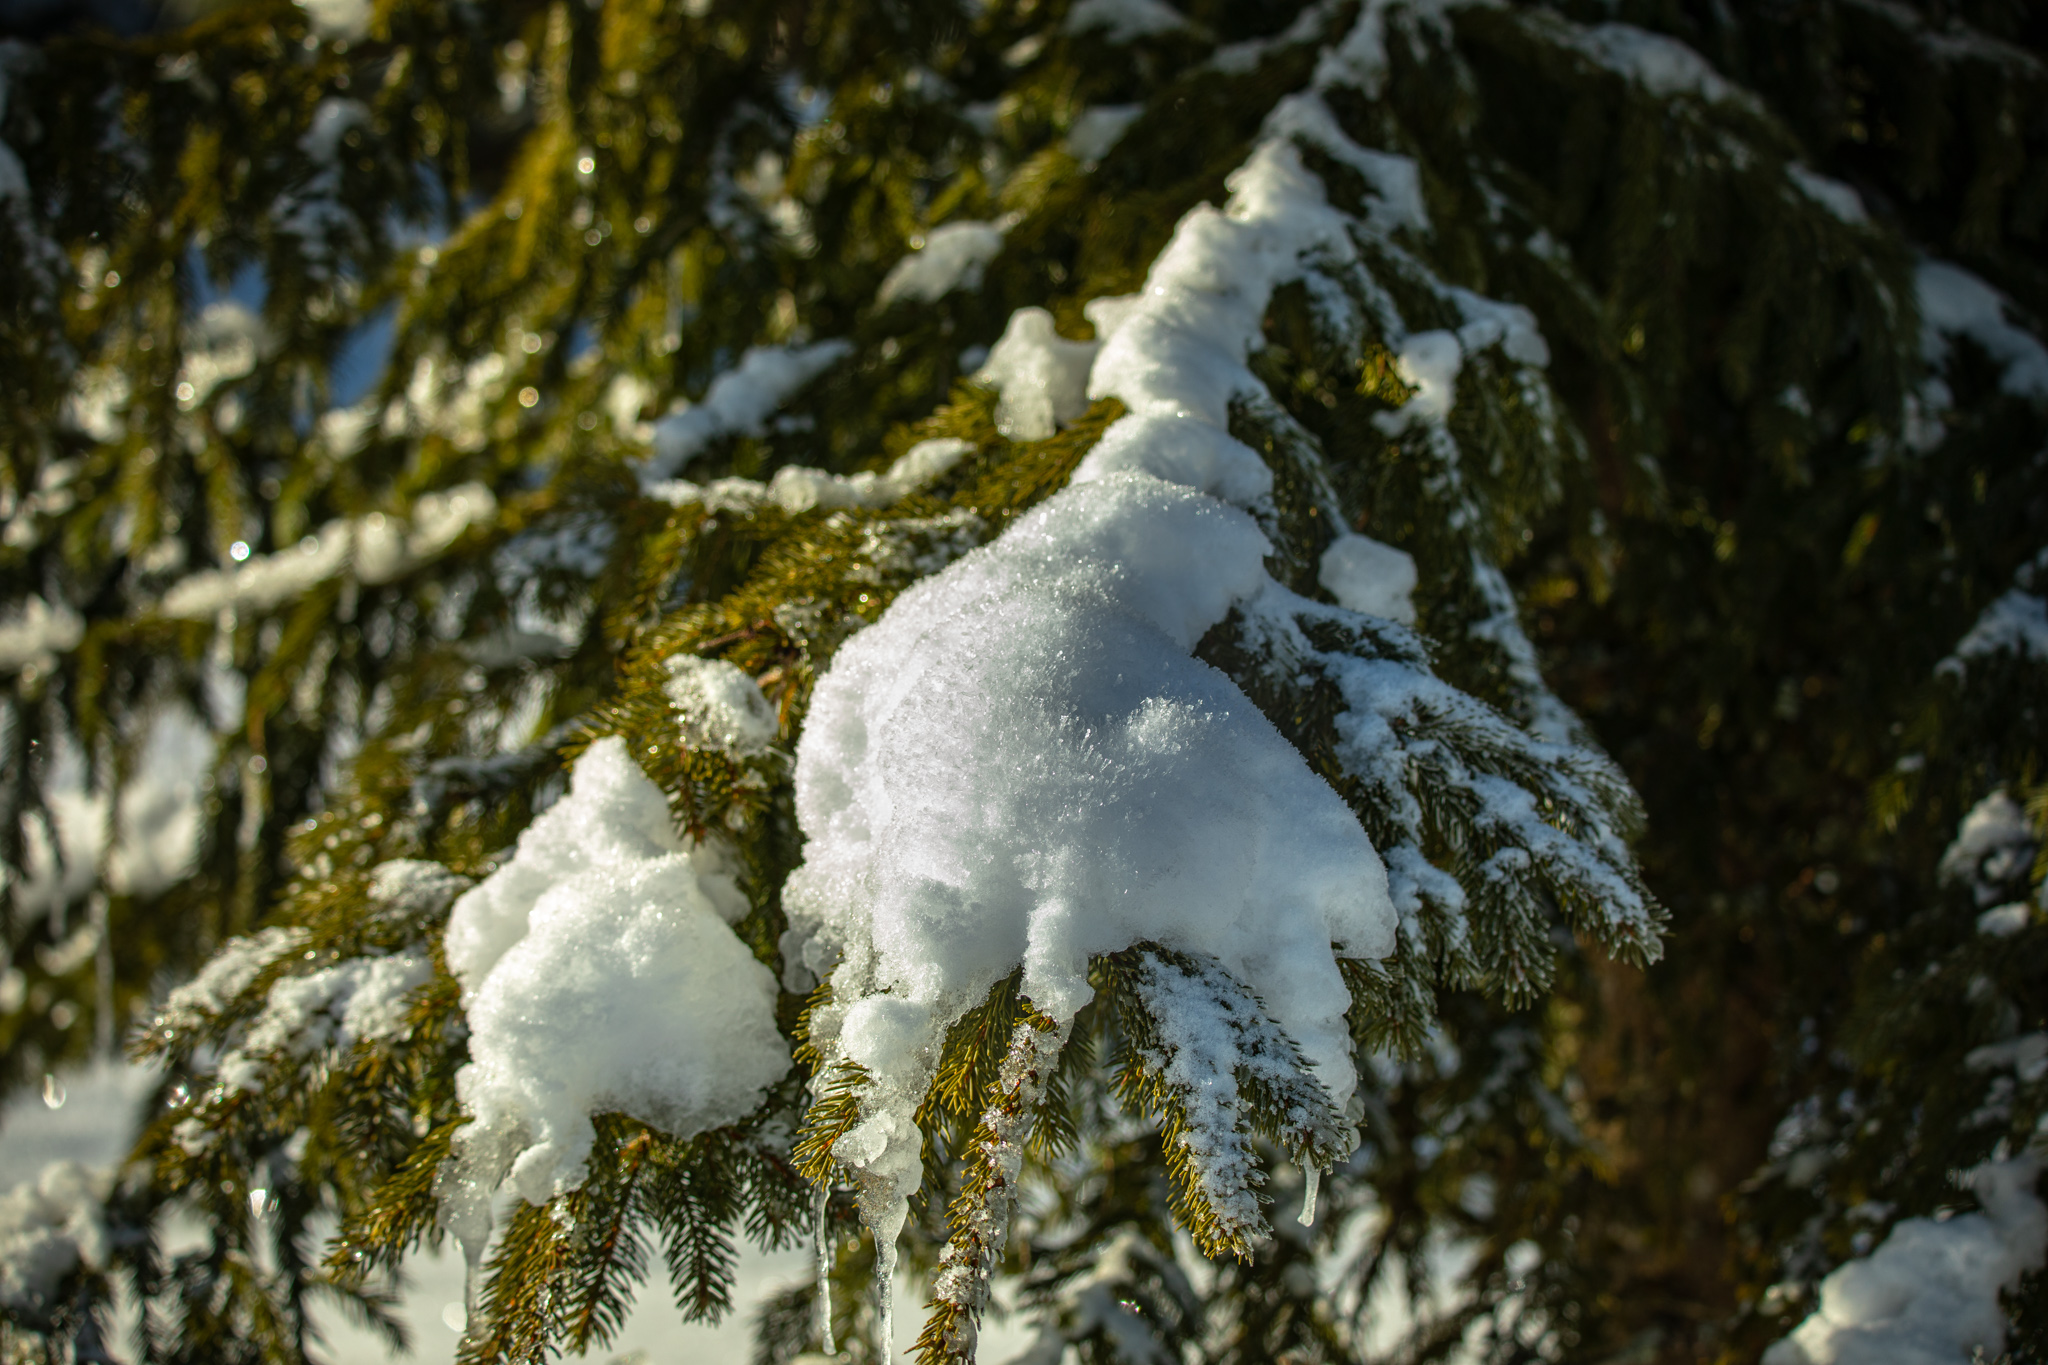 General 2048x1365 photography trees snow ice pine needles outdoors plants greenery nature